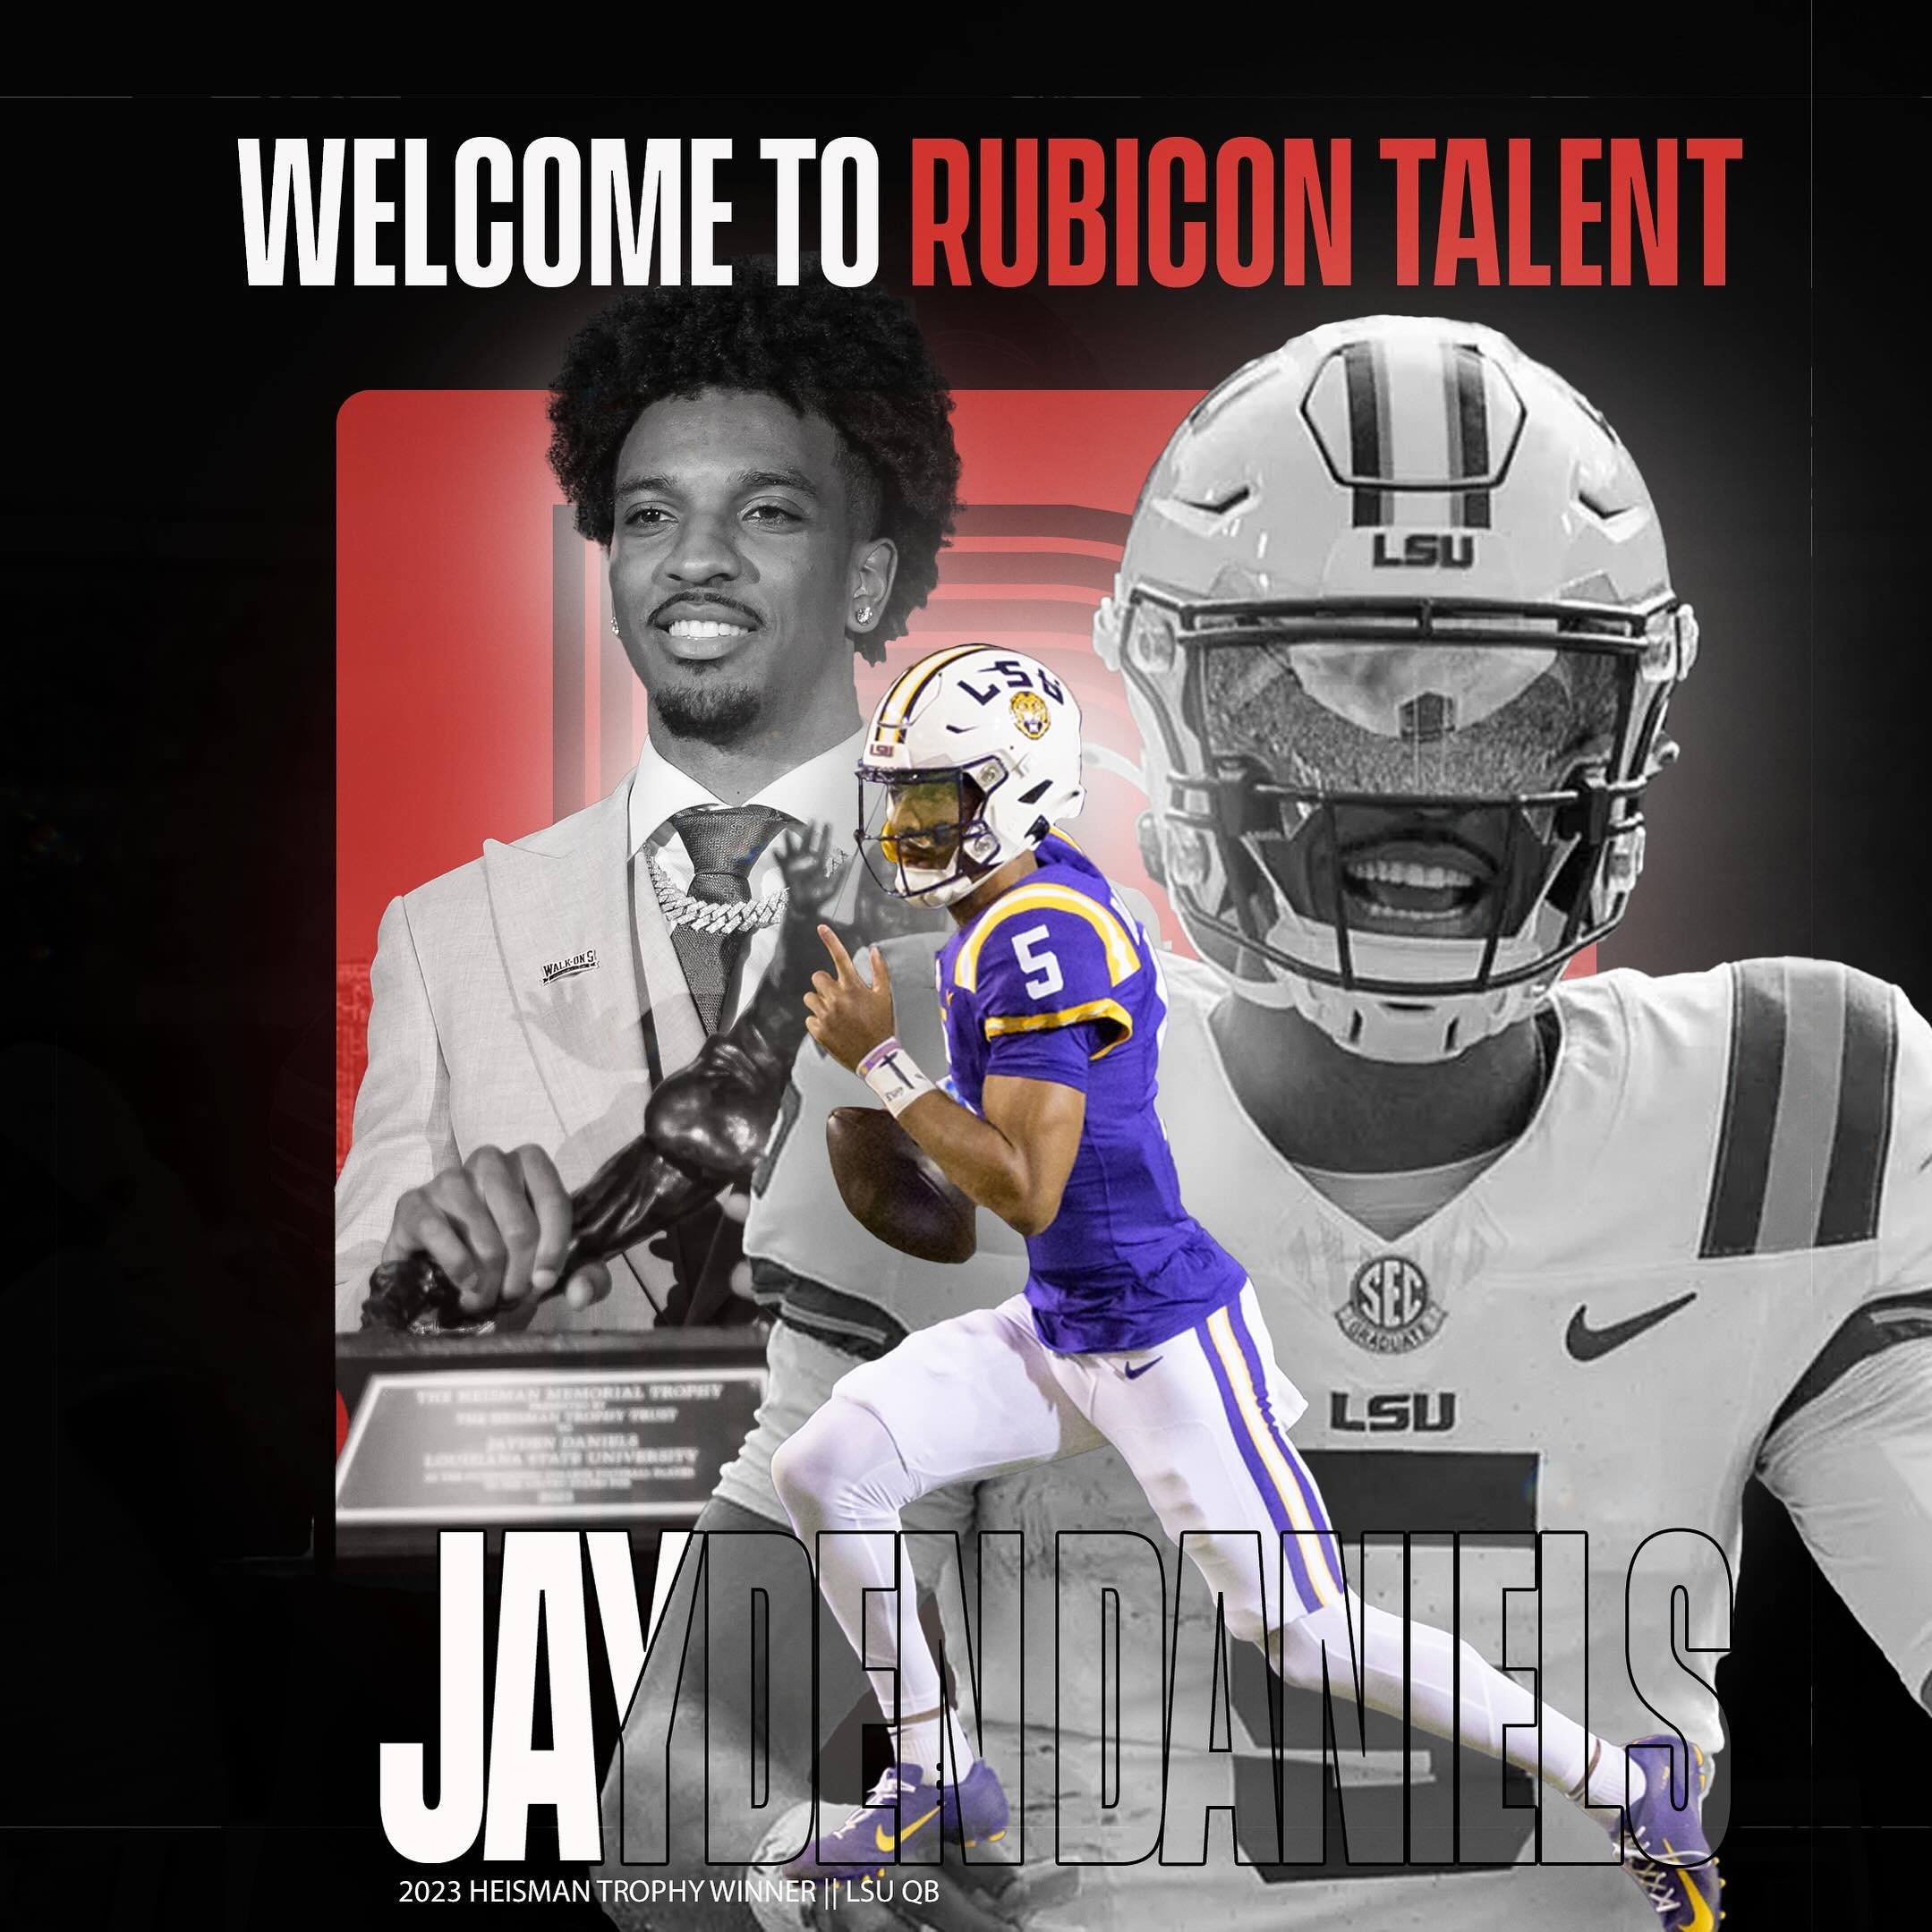 We are thrilled to welcome Heisman Trophy Winner, LSU Quarterback, Jayden Daniels to Rubicon Talent!💫 

We will support and advise Jayden in all areas off-the-field, excluding all PR! Rubicon will work to develop his brand as well as build a strateg